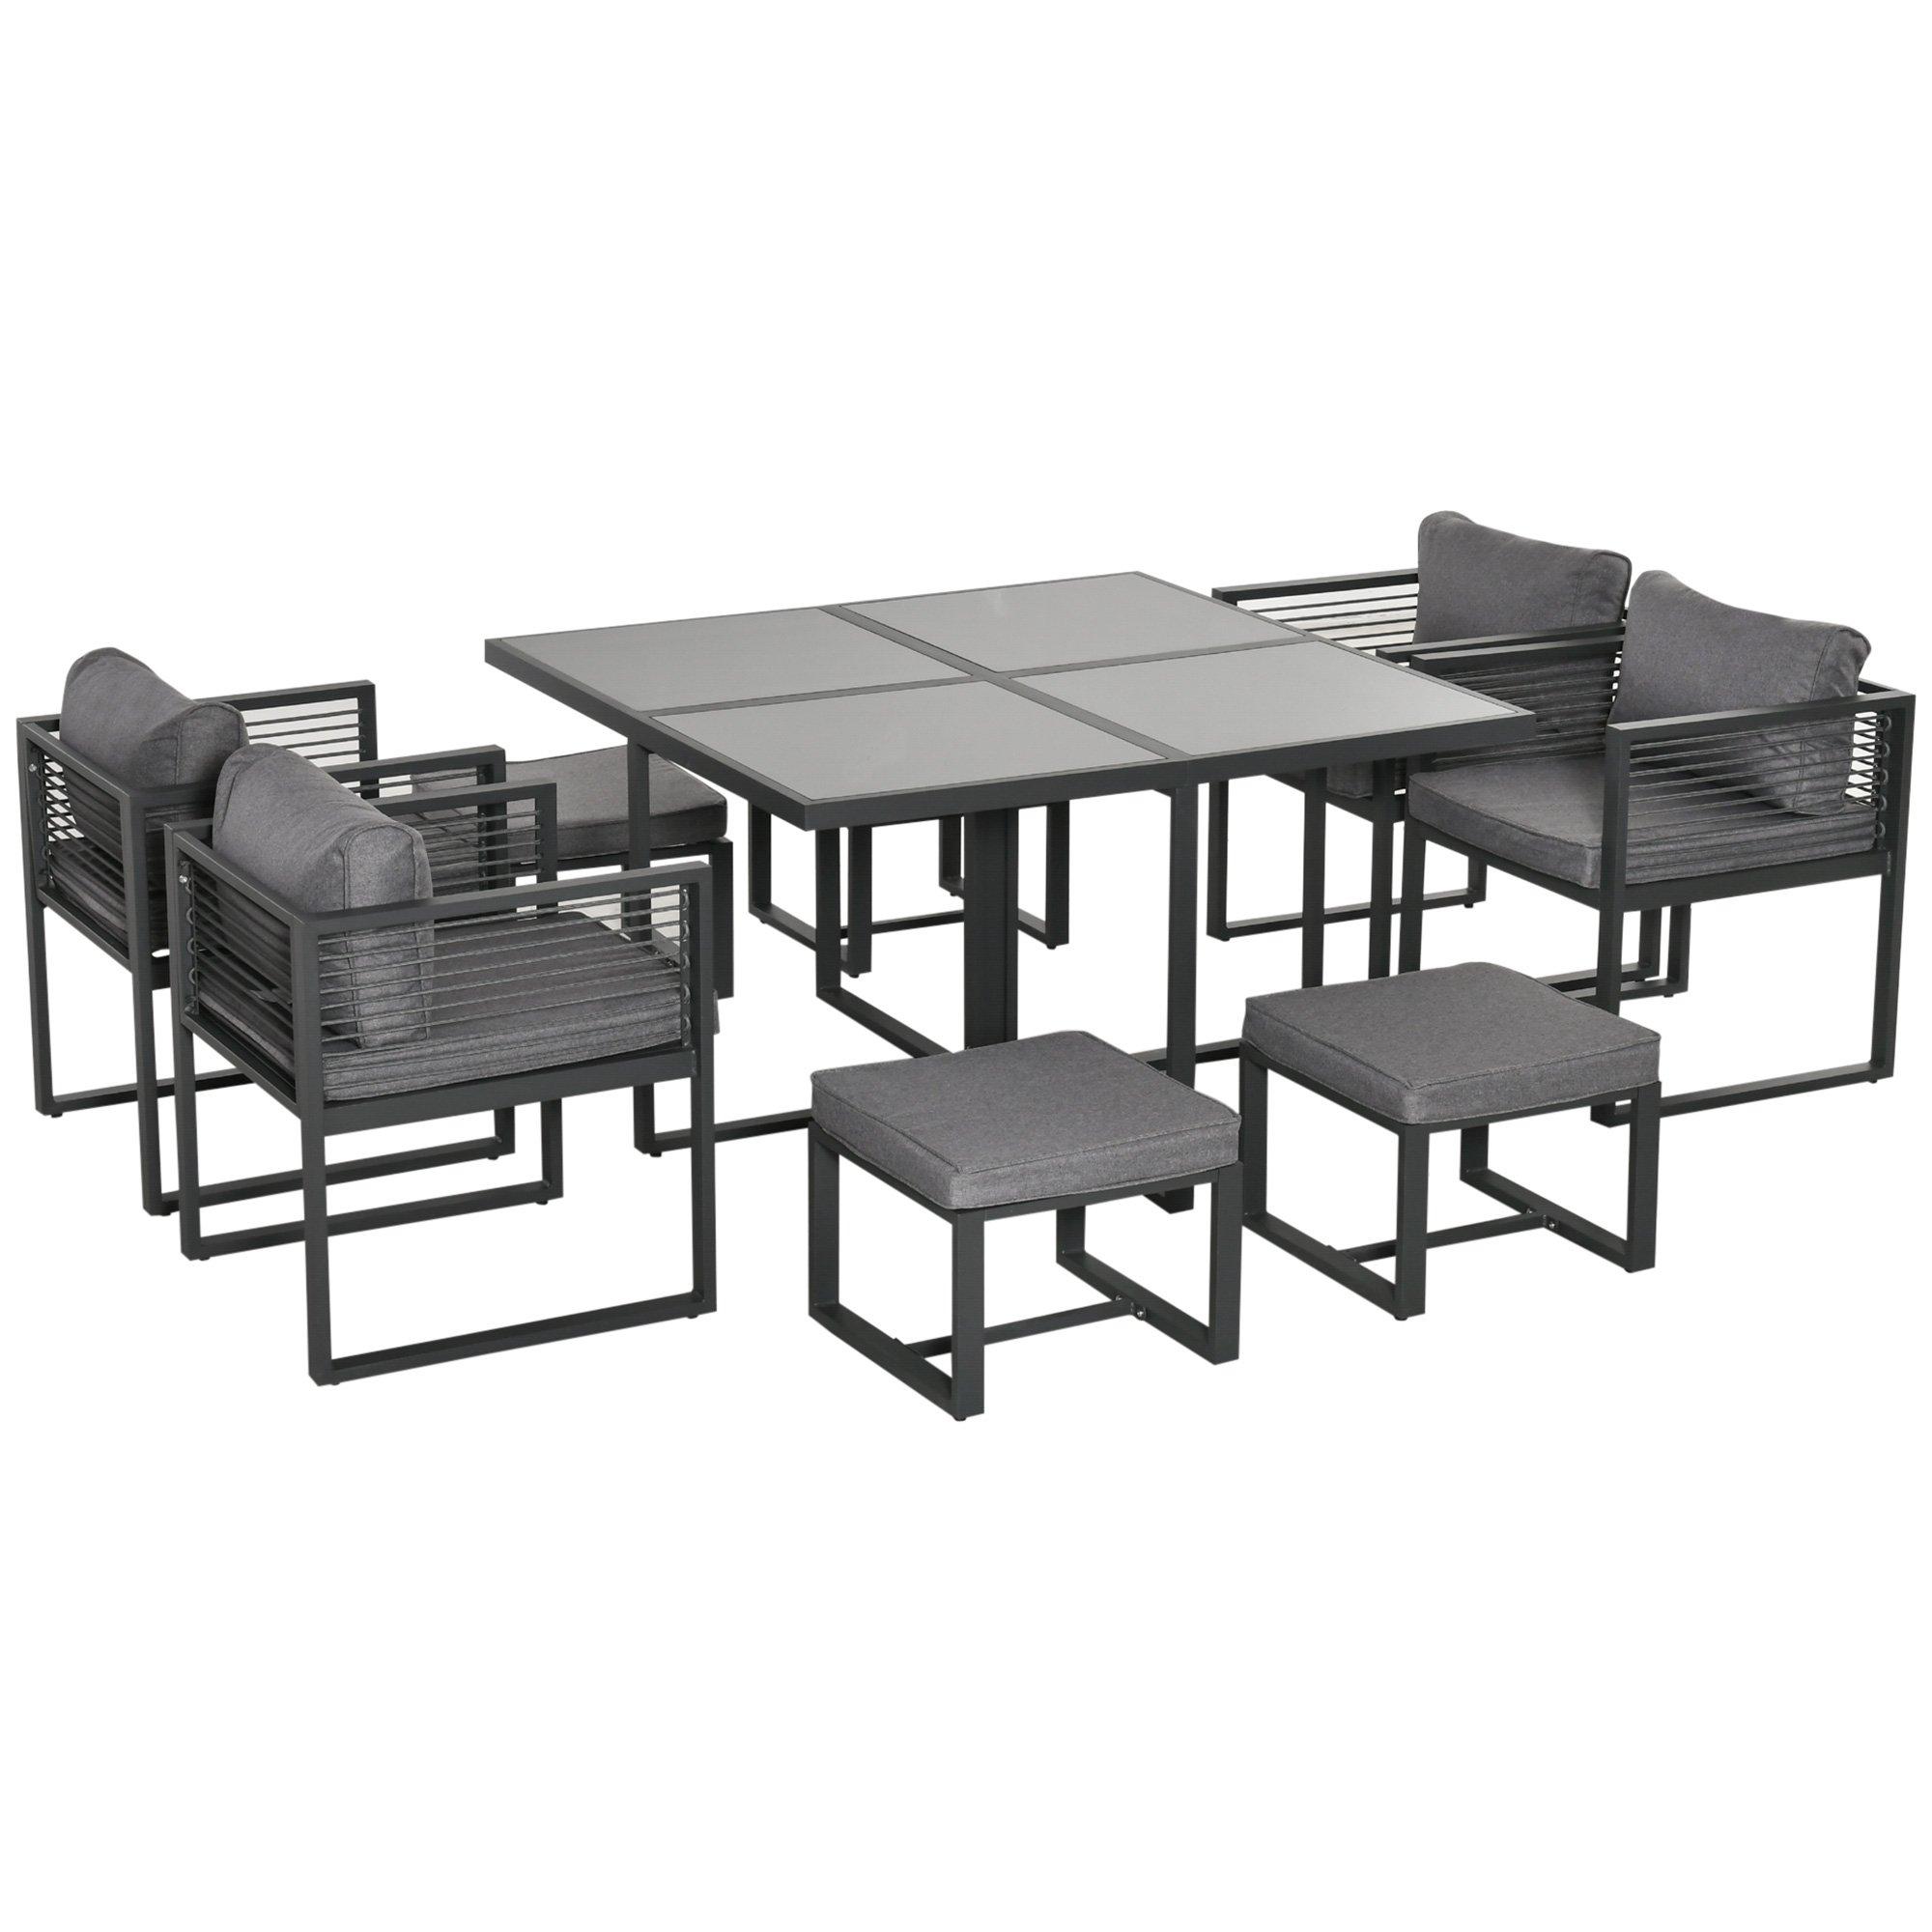 8 Seater Aluminium  Garden Dining Cube Setwith 4 Chairs 4 Footstools